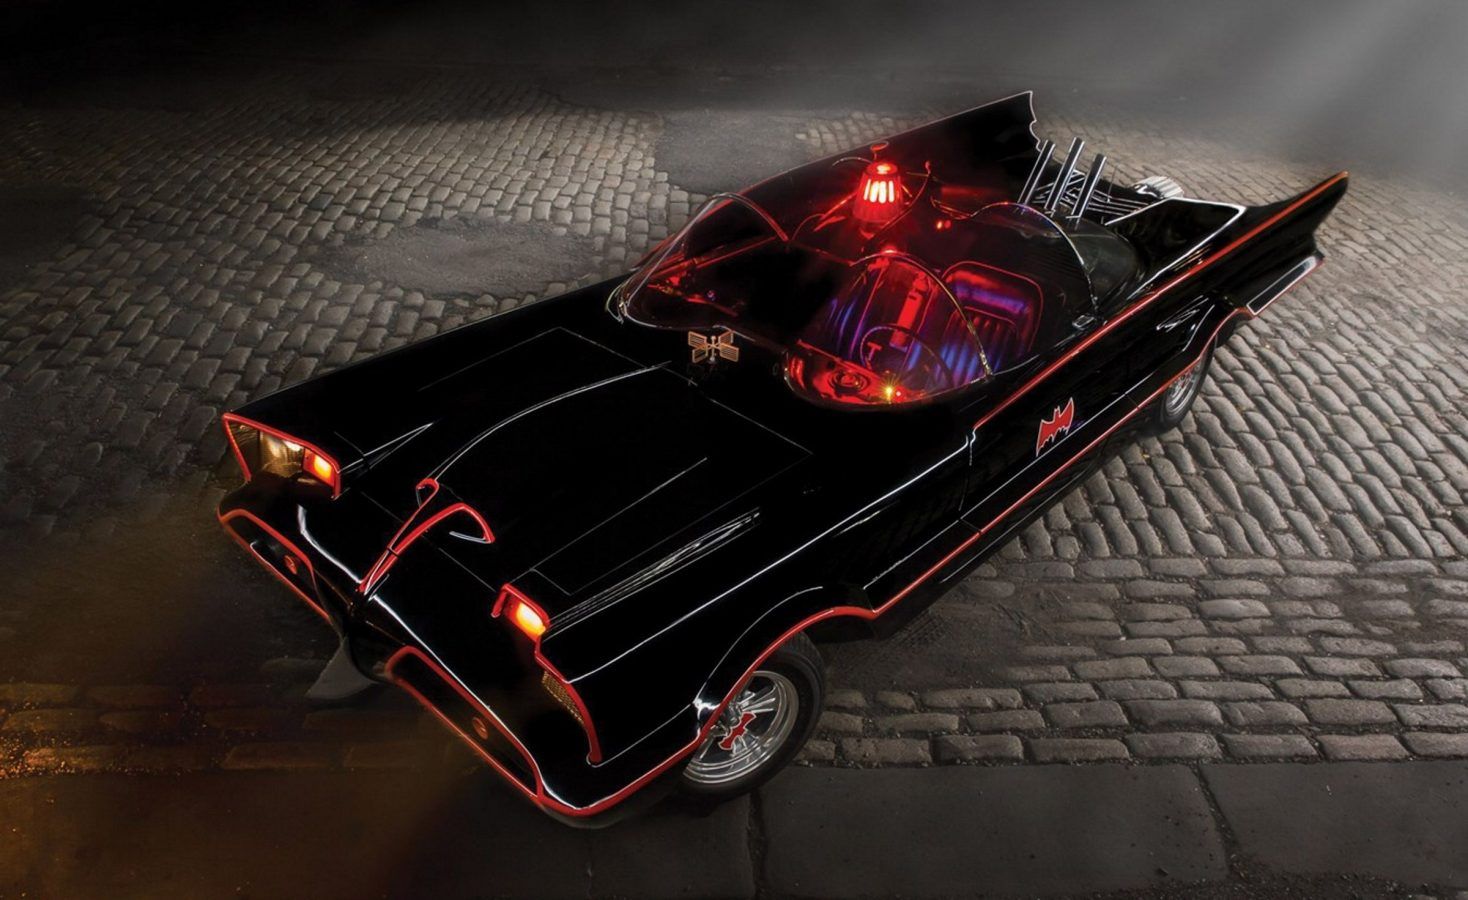 The most iconic and famous cars in cinema history since 1920